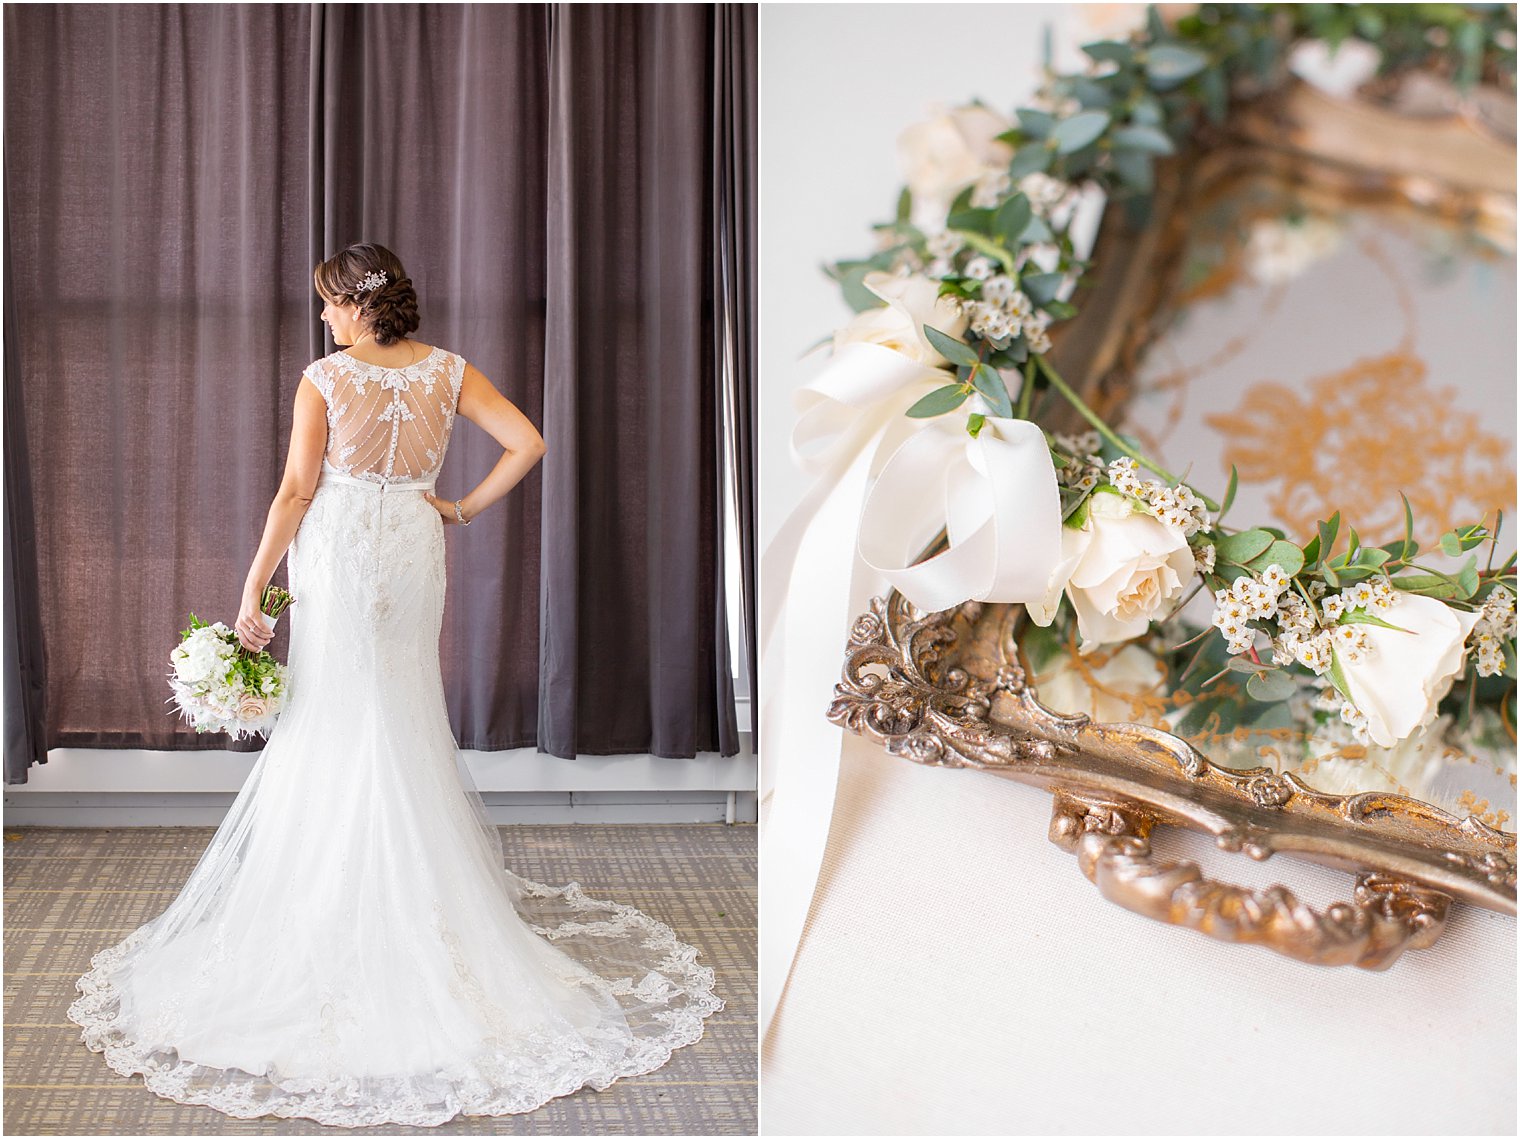 Lace back of Maggie Sottero wedding gown and floral crown by Flowerful Events at Ocean Place Resort and Spa